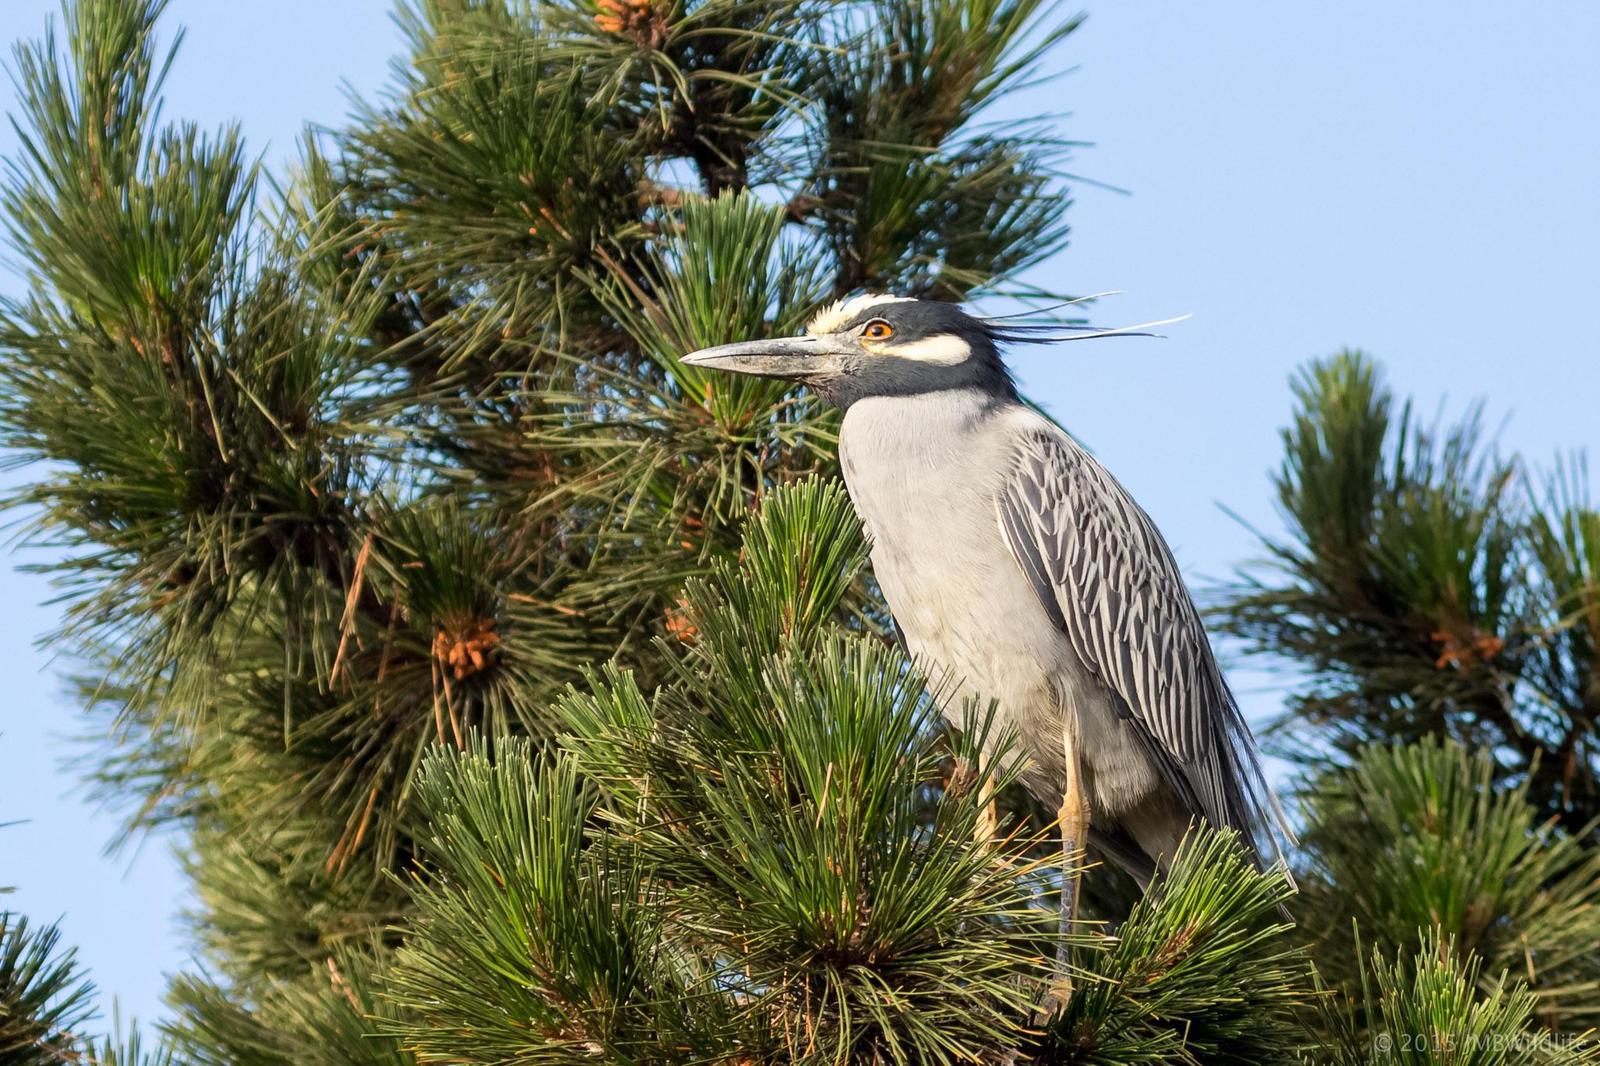 Yellow-crowned Night-Heron Photo by Jeff Bray